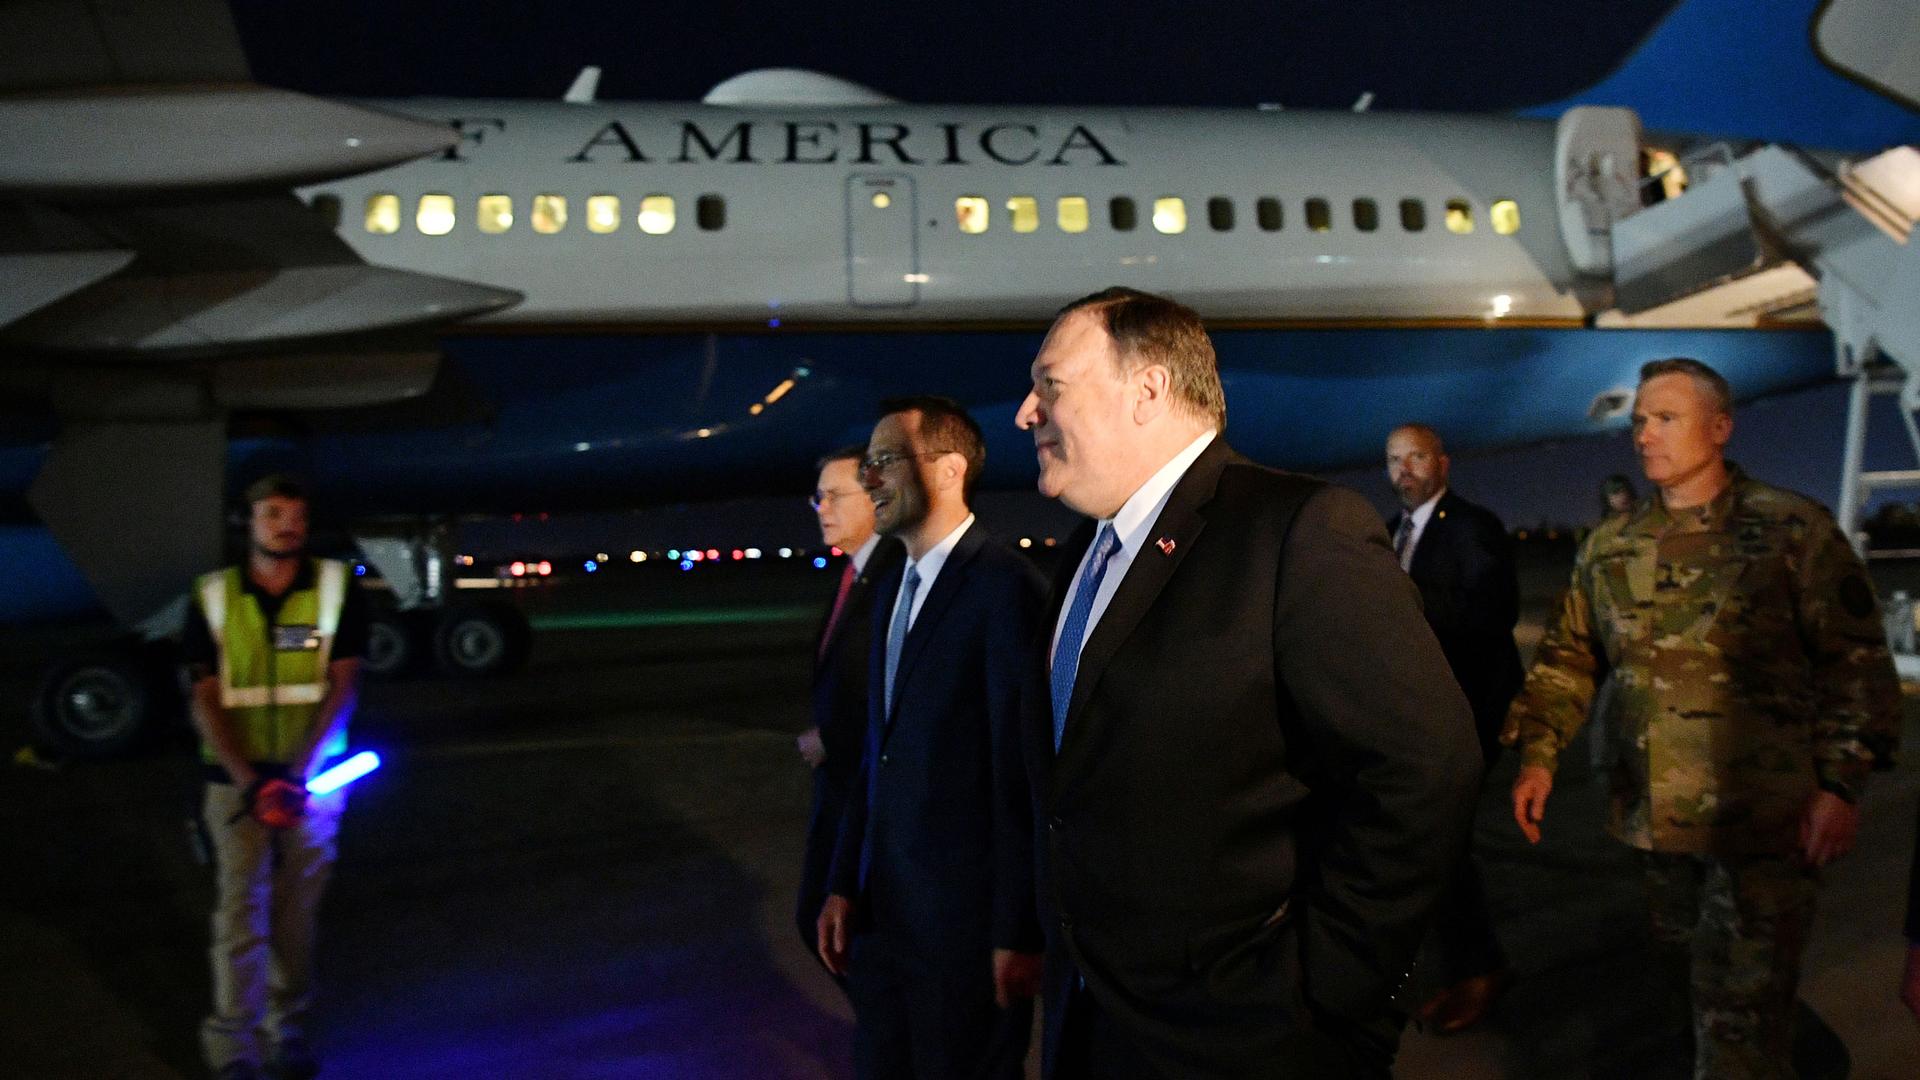 US Secretary of State Mike Pompeo is shown wearing a dark suit and blue tie while walking on the tarmac in Iraq with a State Dept. airplane in the background.